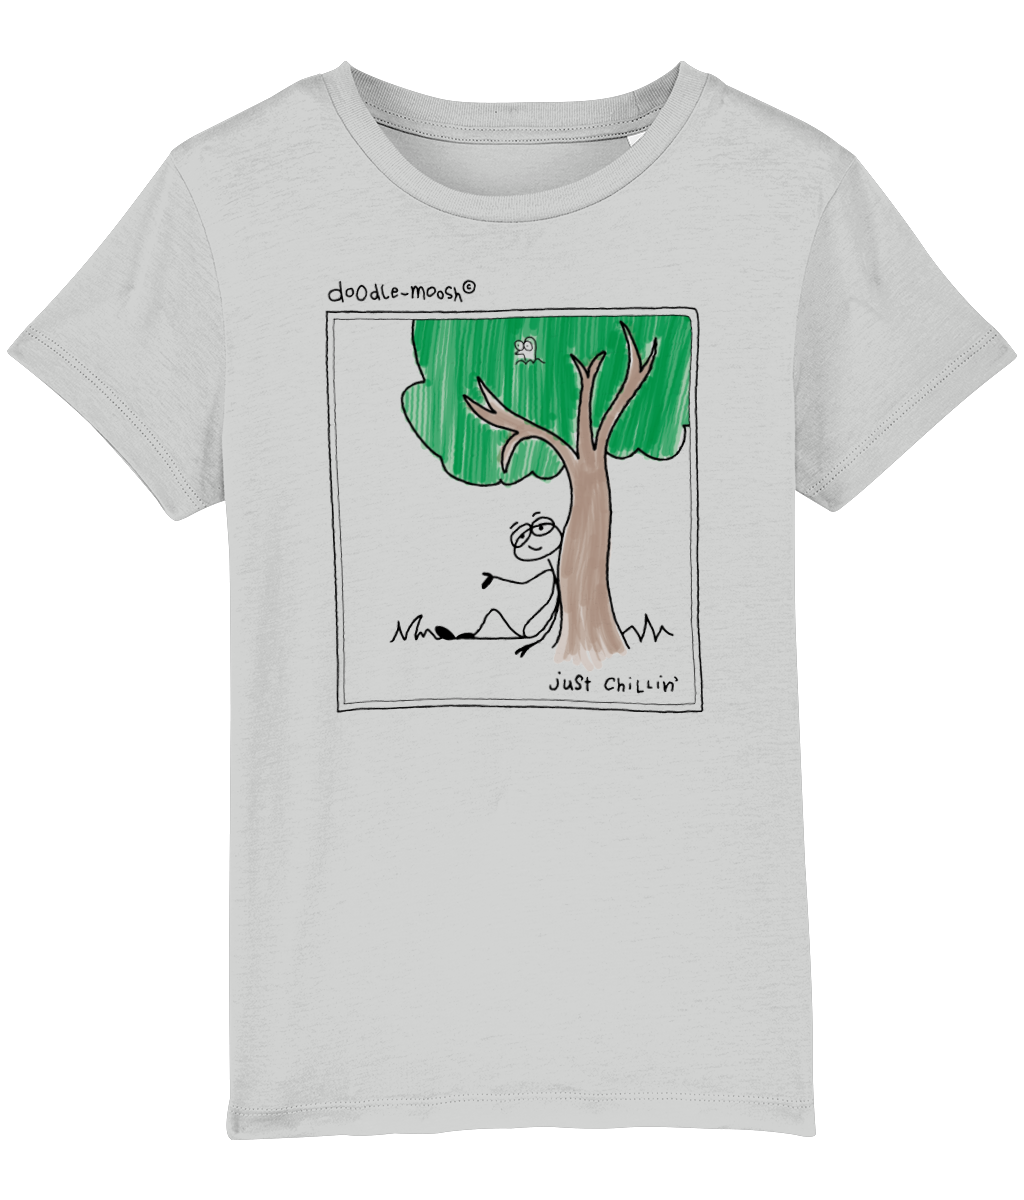 Just chilling t-shirt, white with black, colorful drawing